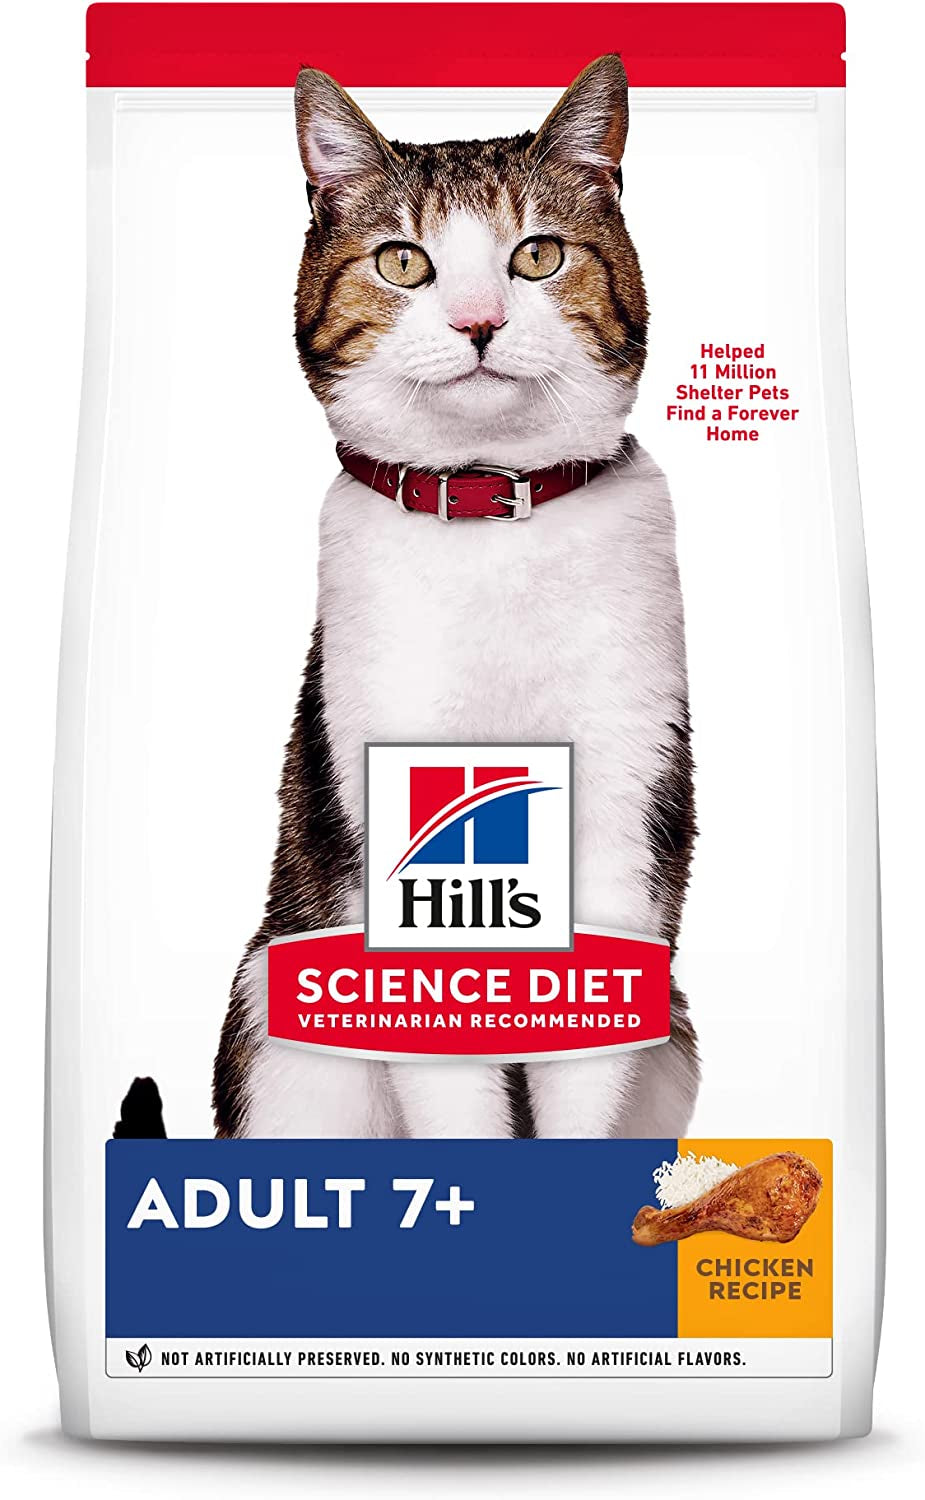 Hill'S Science Diet Dry Cat Food, Adult 7+ for Senior Cats, Chicken Recipe, 16 Lb. Bag